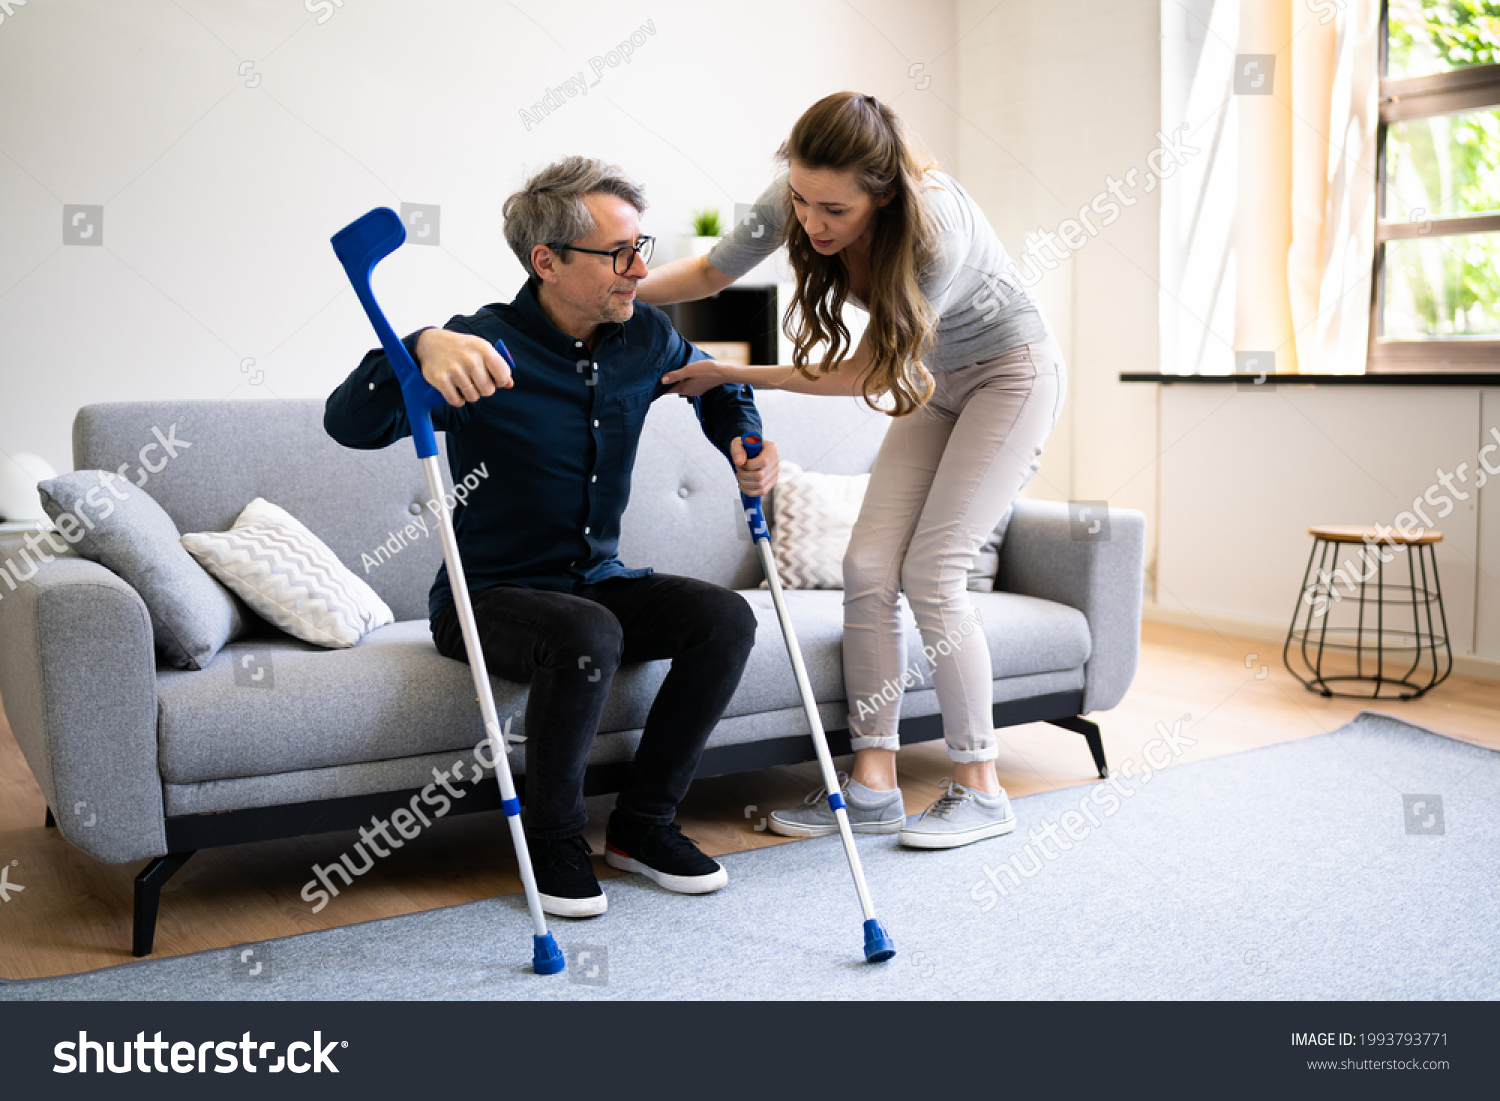 Woman Helping Injured Handicapped Man Crutches Stock Photo 1993793771 ...